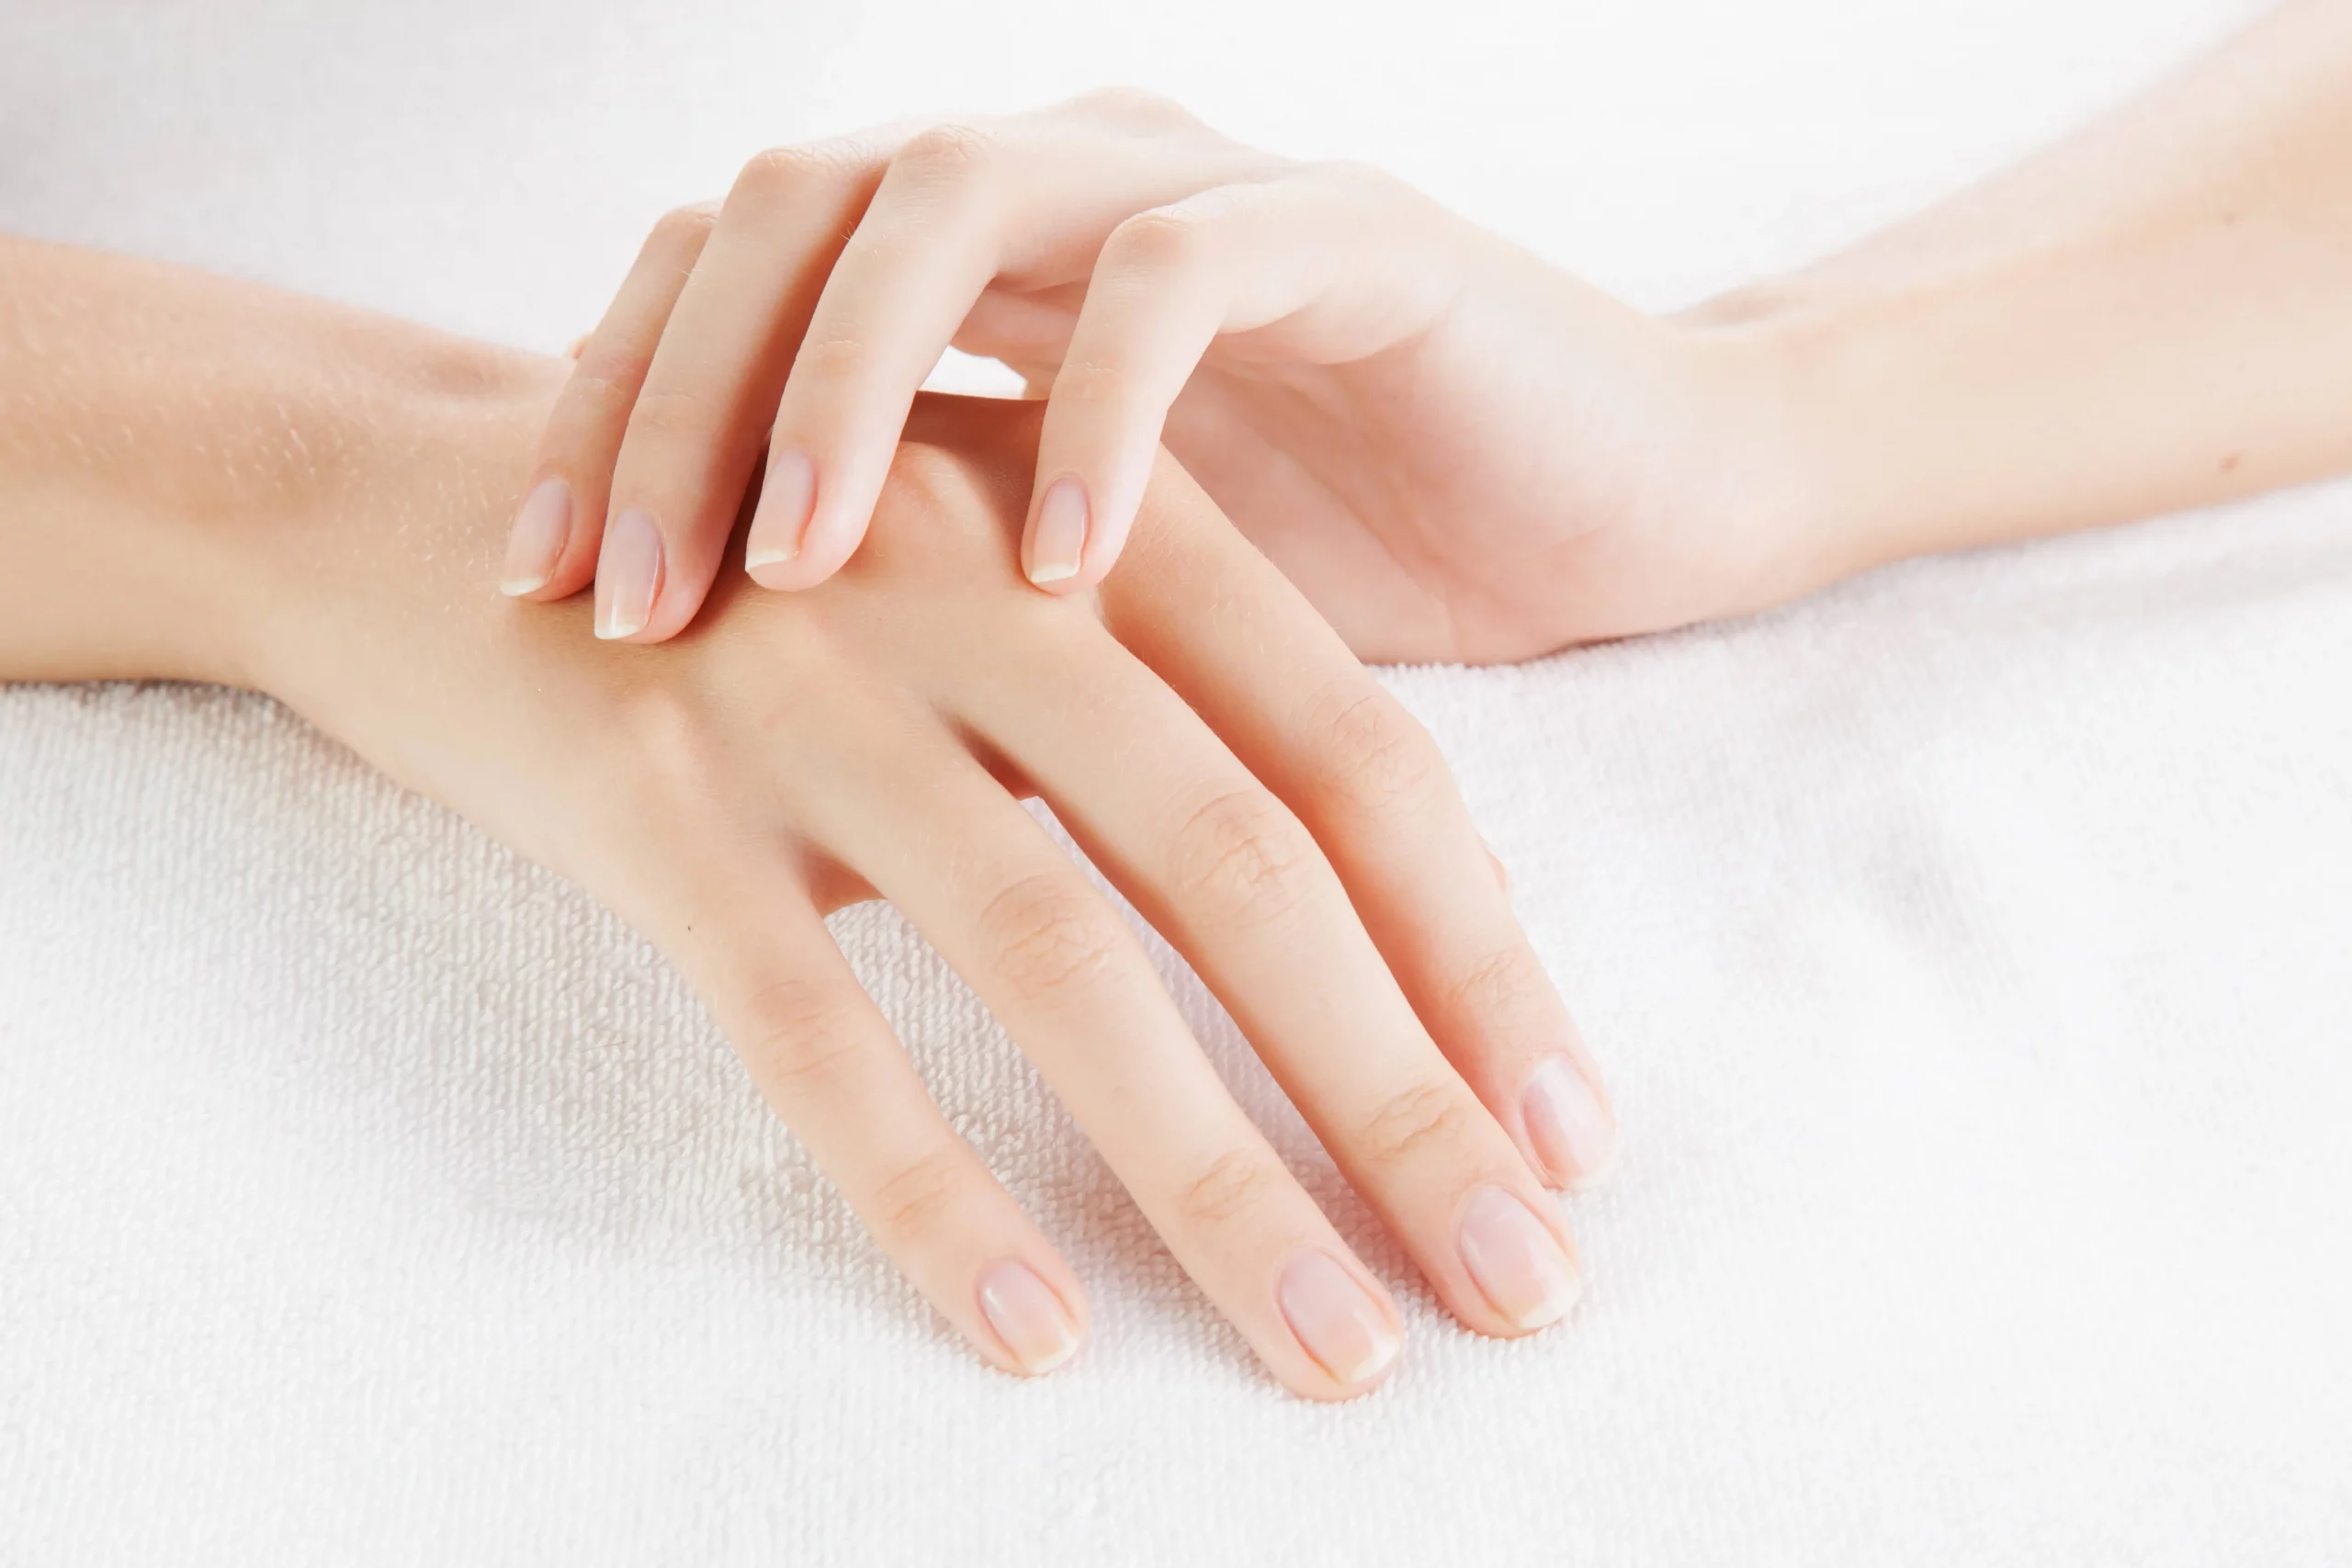 How Can We Keep Nails Healthy and Prevent Infection